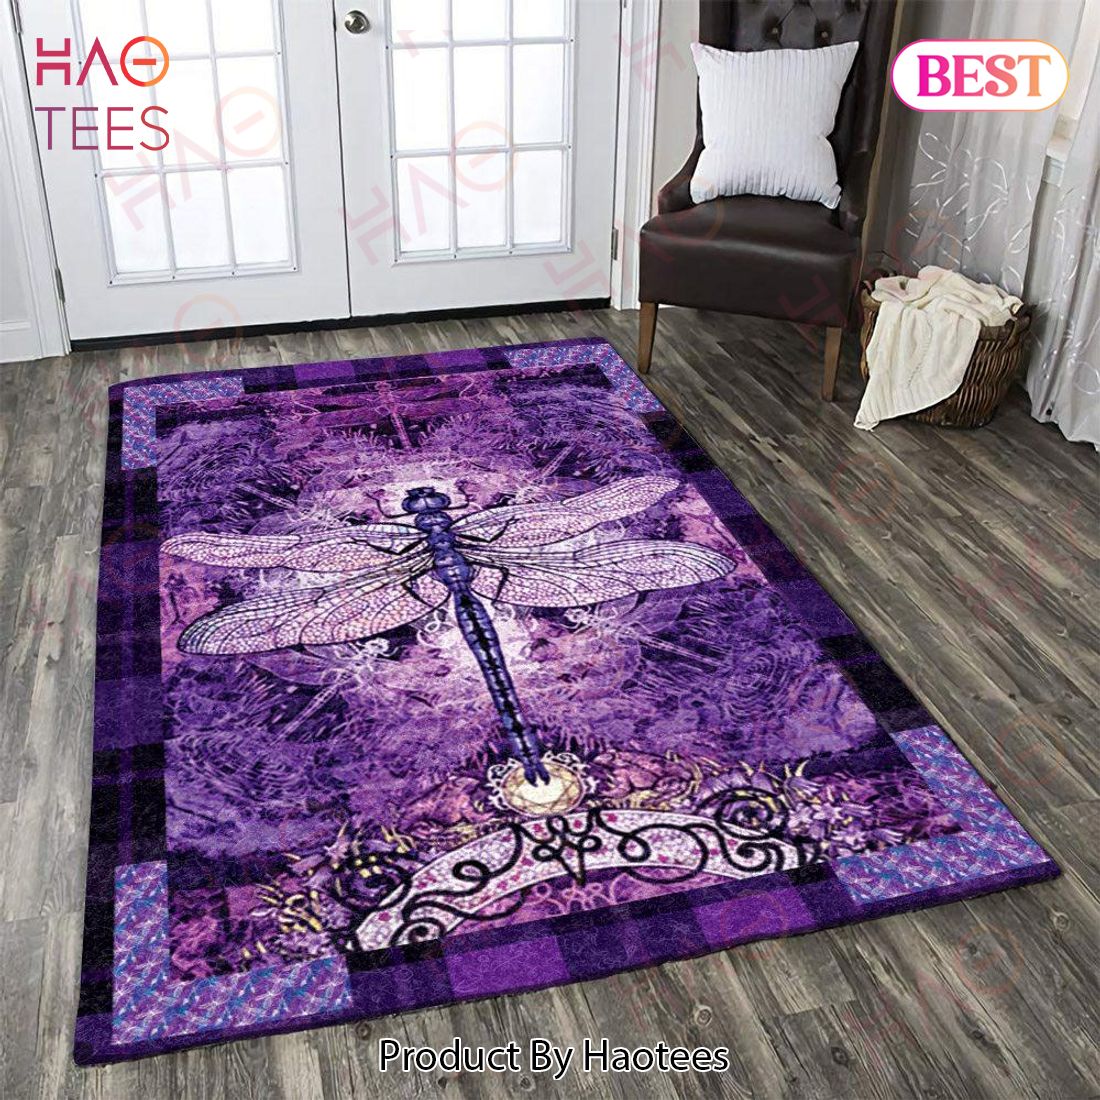 Dragonfly Limited Edition Area Rugs Carpet Mat Kitchen Rugs Floor Decor - EB01